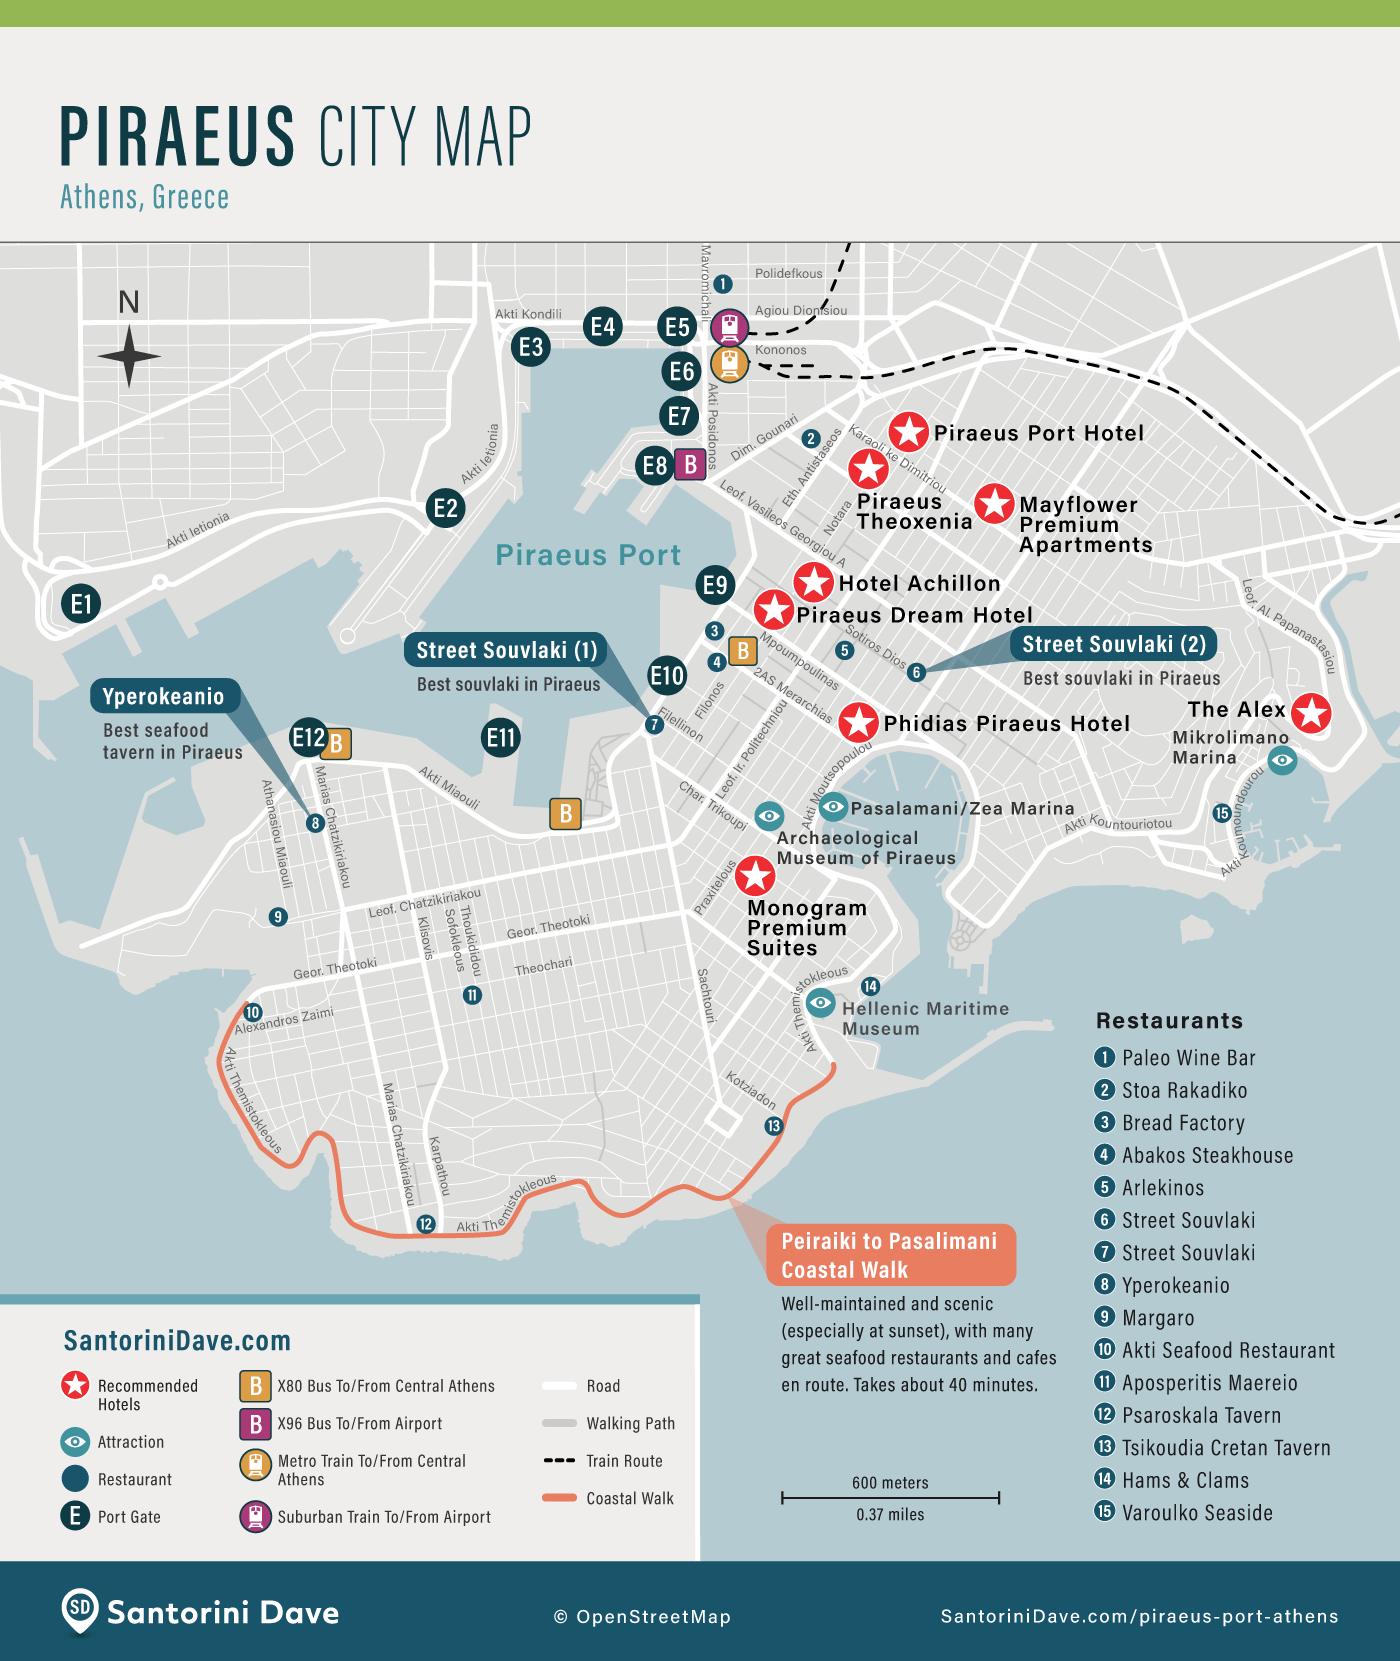 Map of hotels, port gates, bus and train stops, things to do, and restaurants at Piraeus Port in Greece.